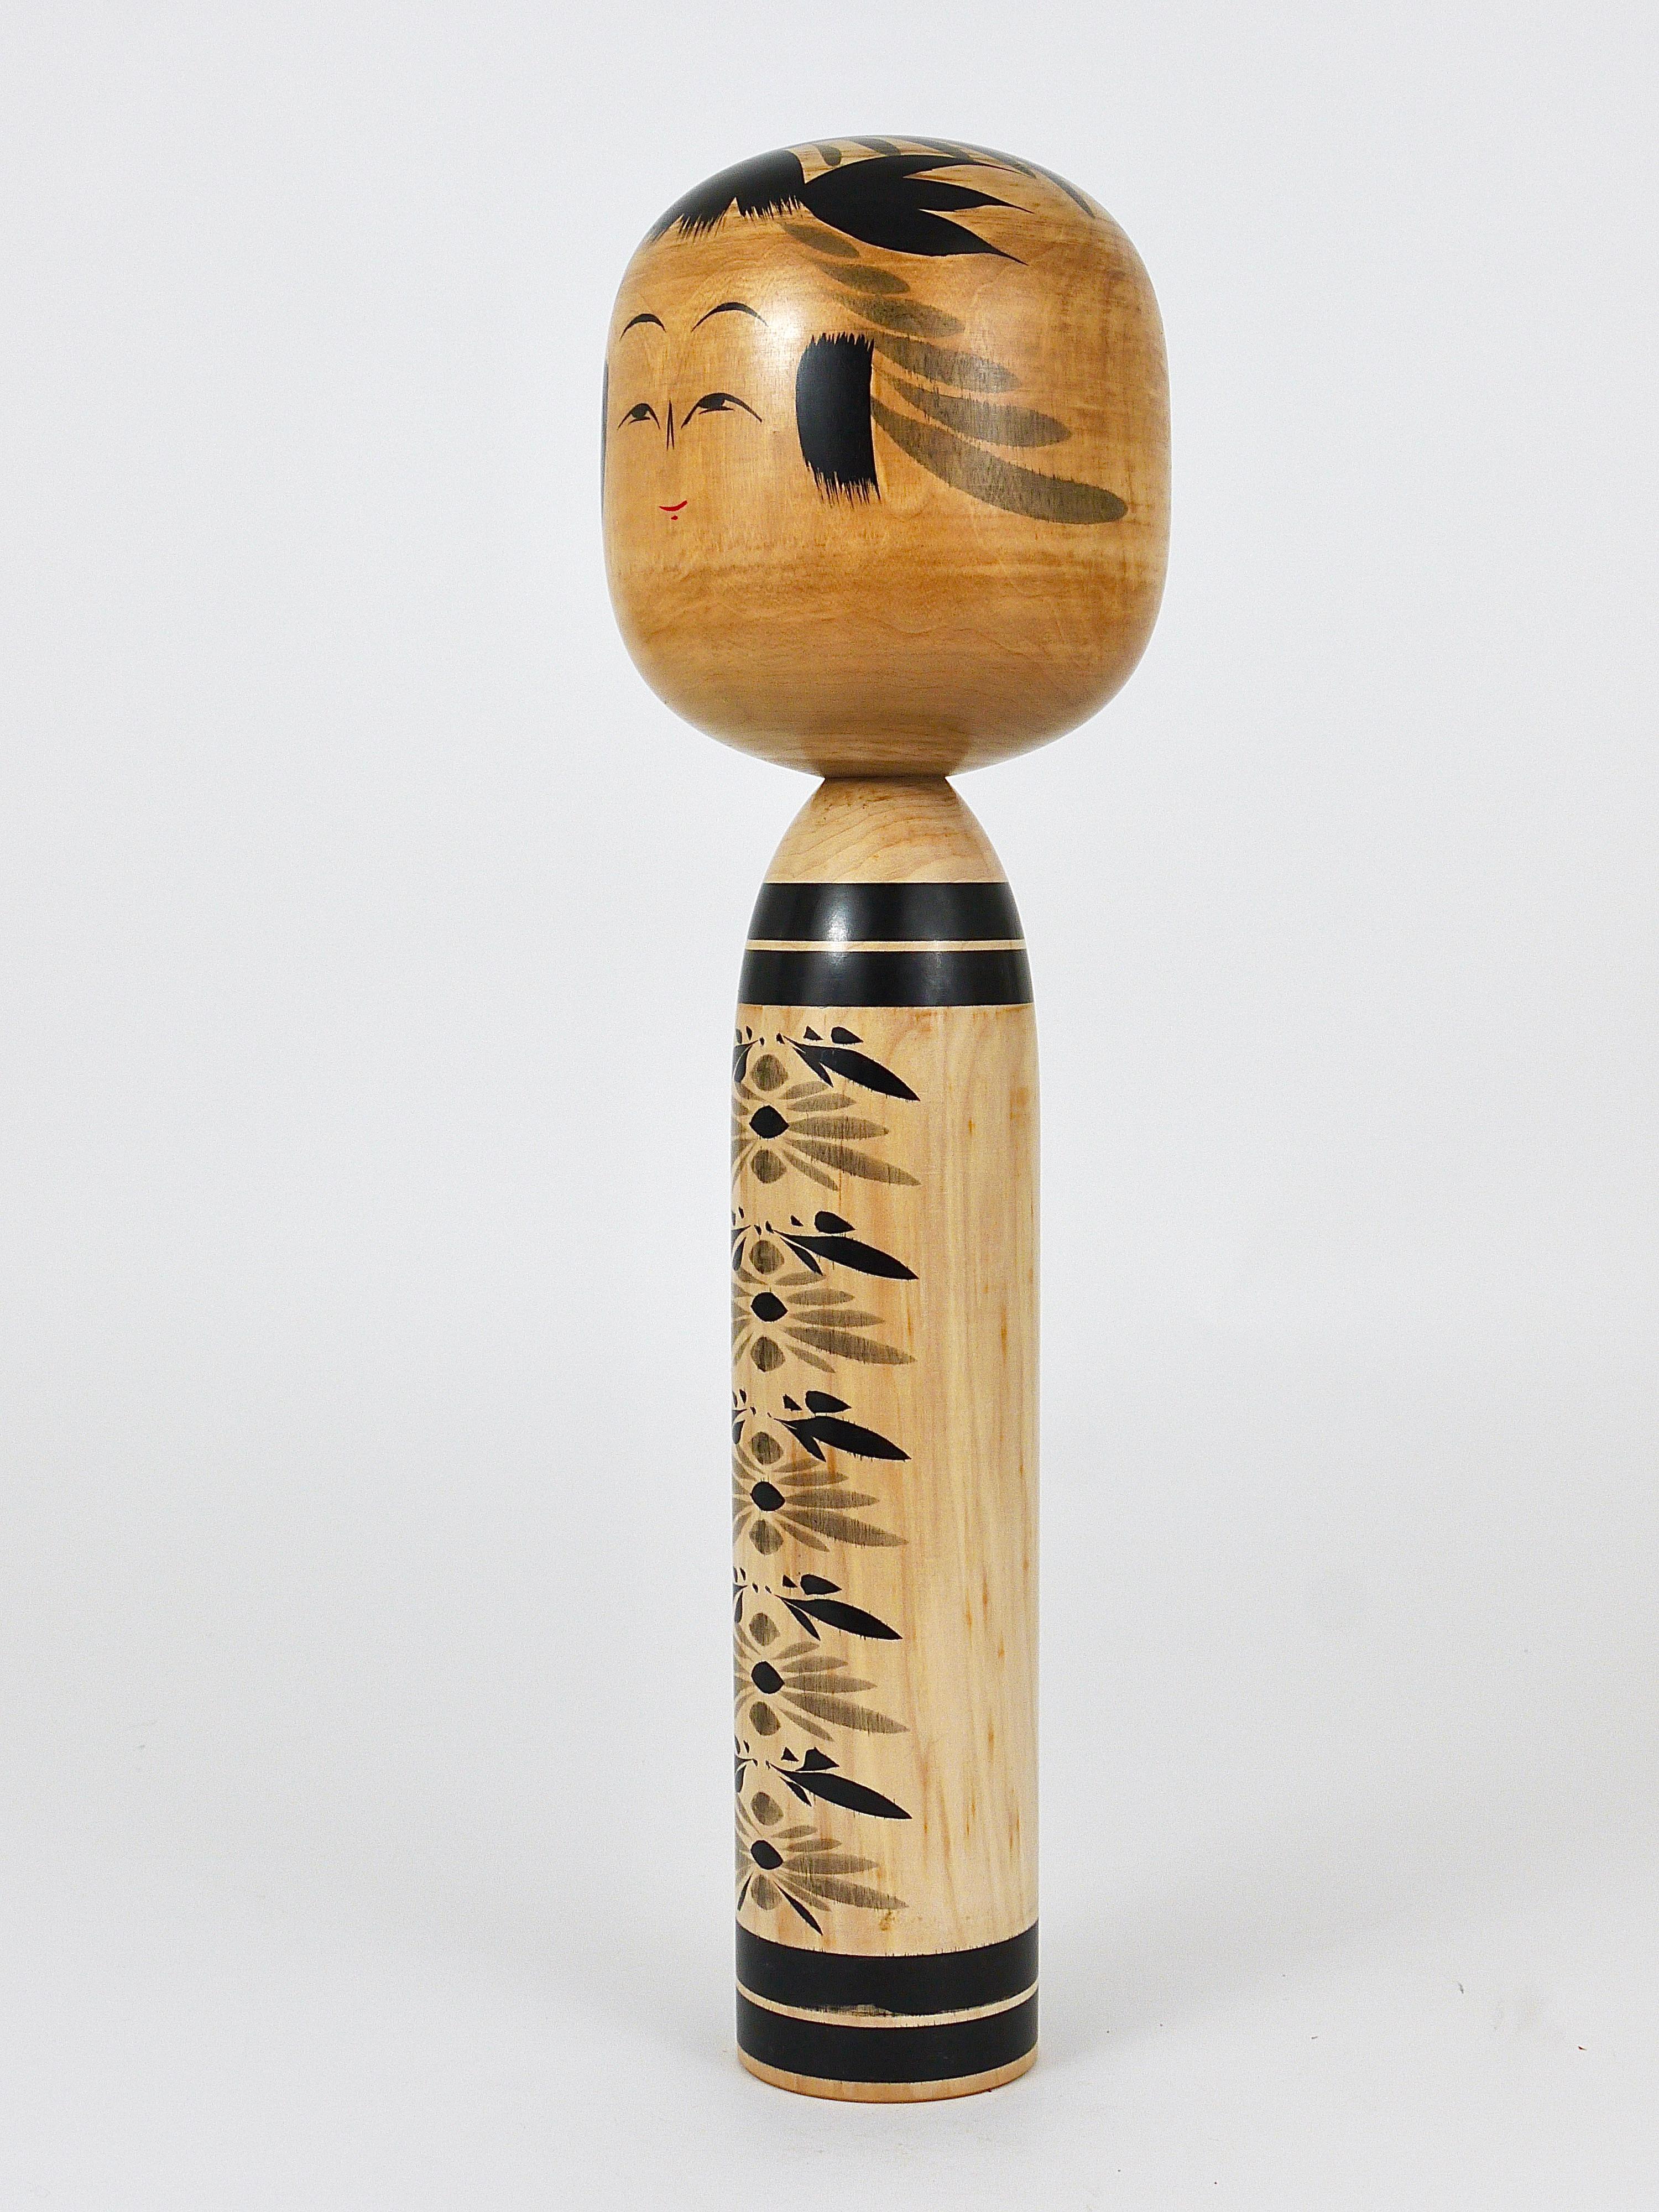 Japanese Decorative Togatta Kokeshi Doll Sculpture from Northern Japan, Hand-Painted For Sale